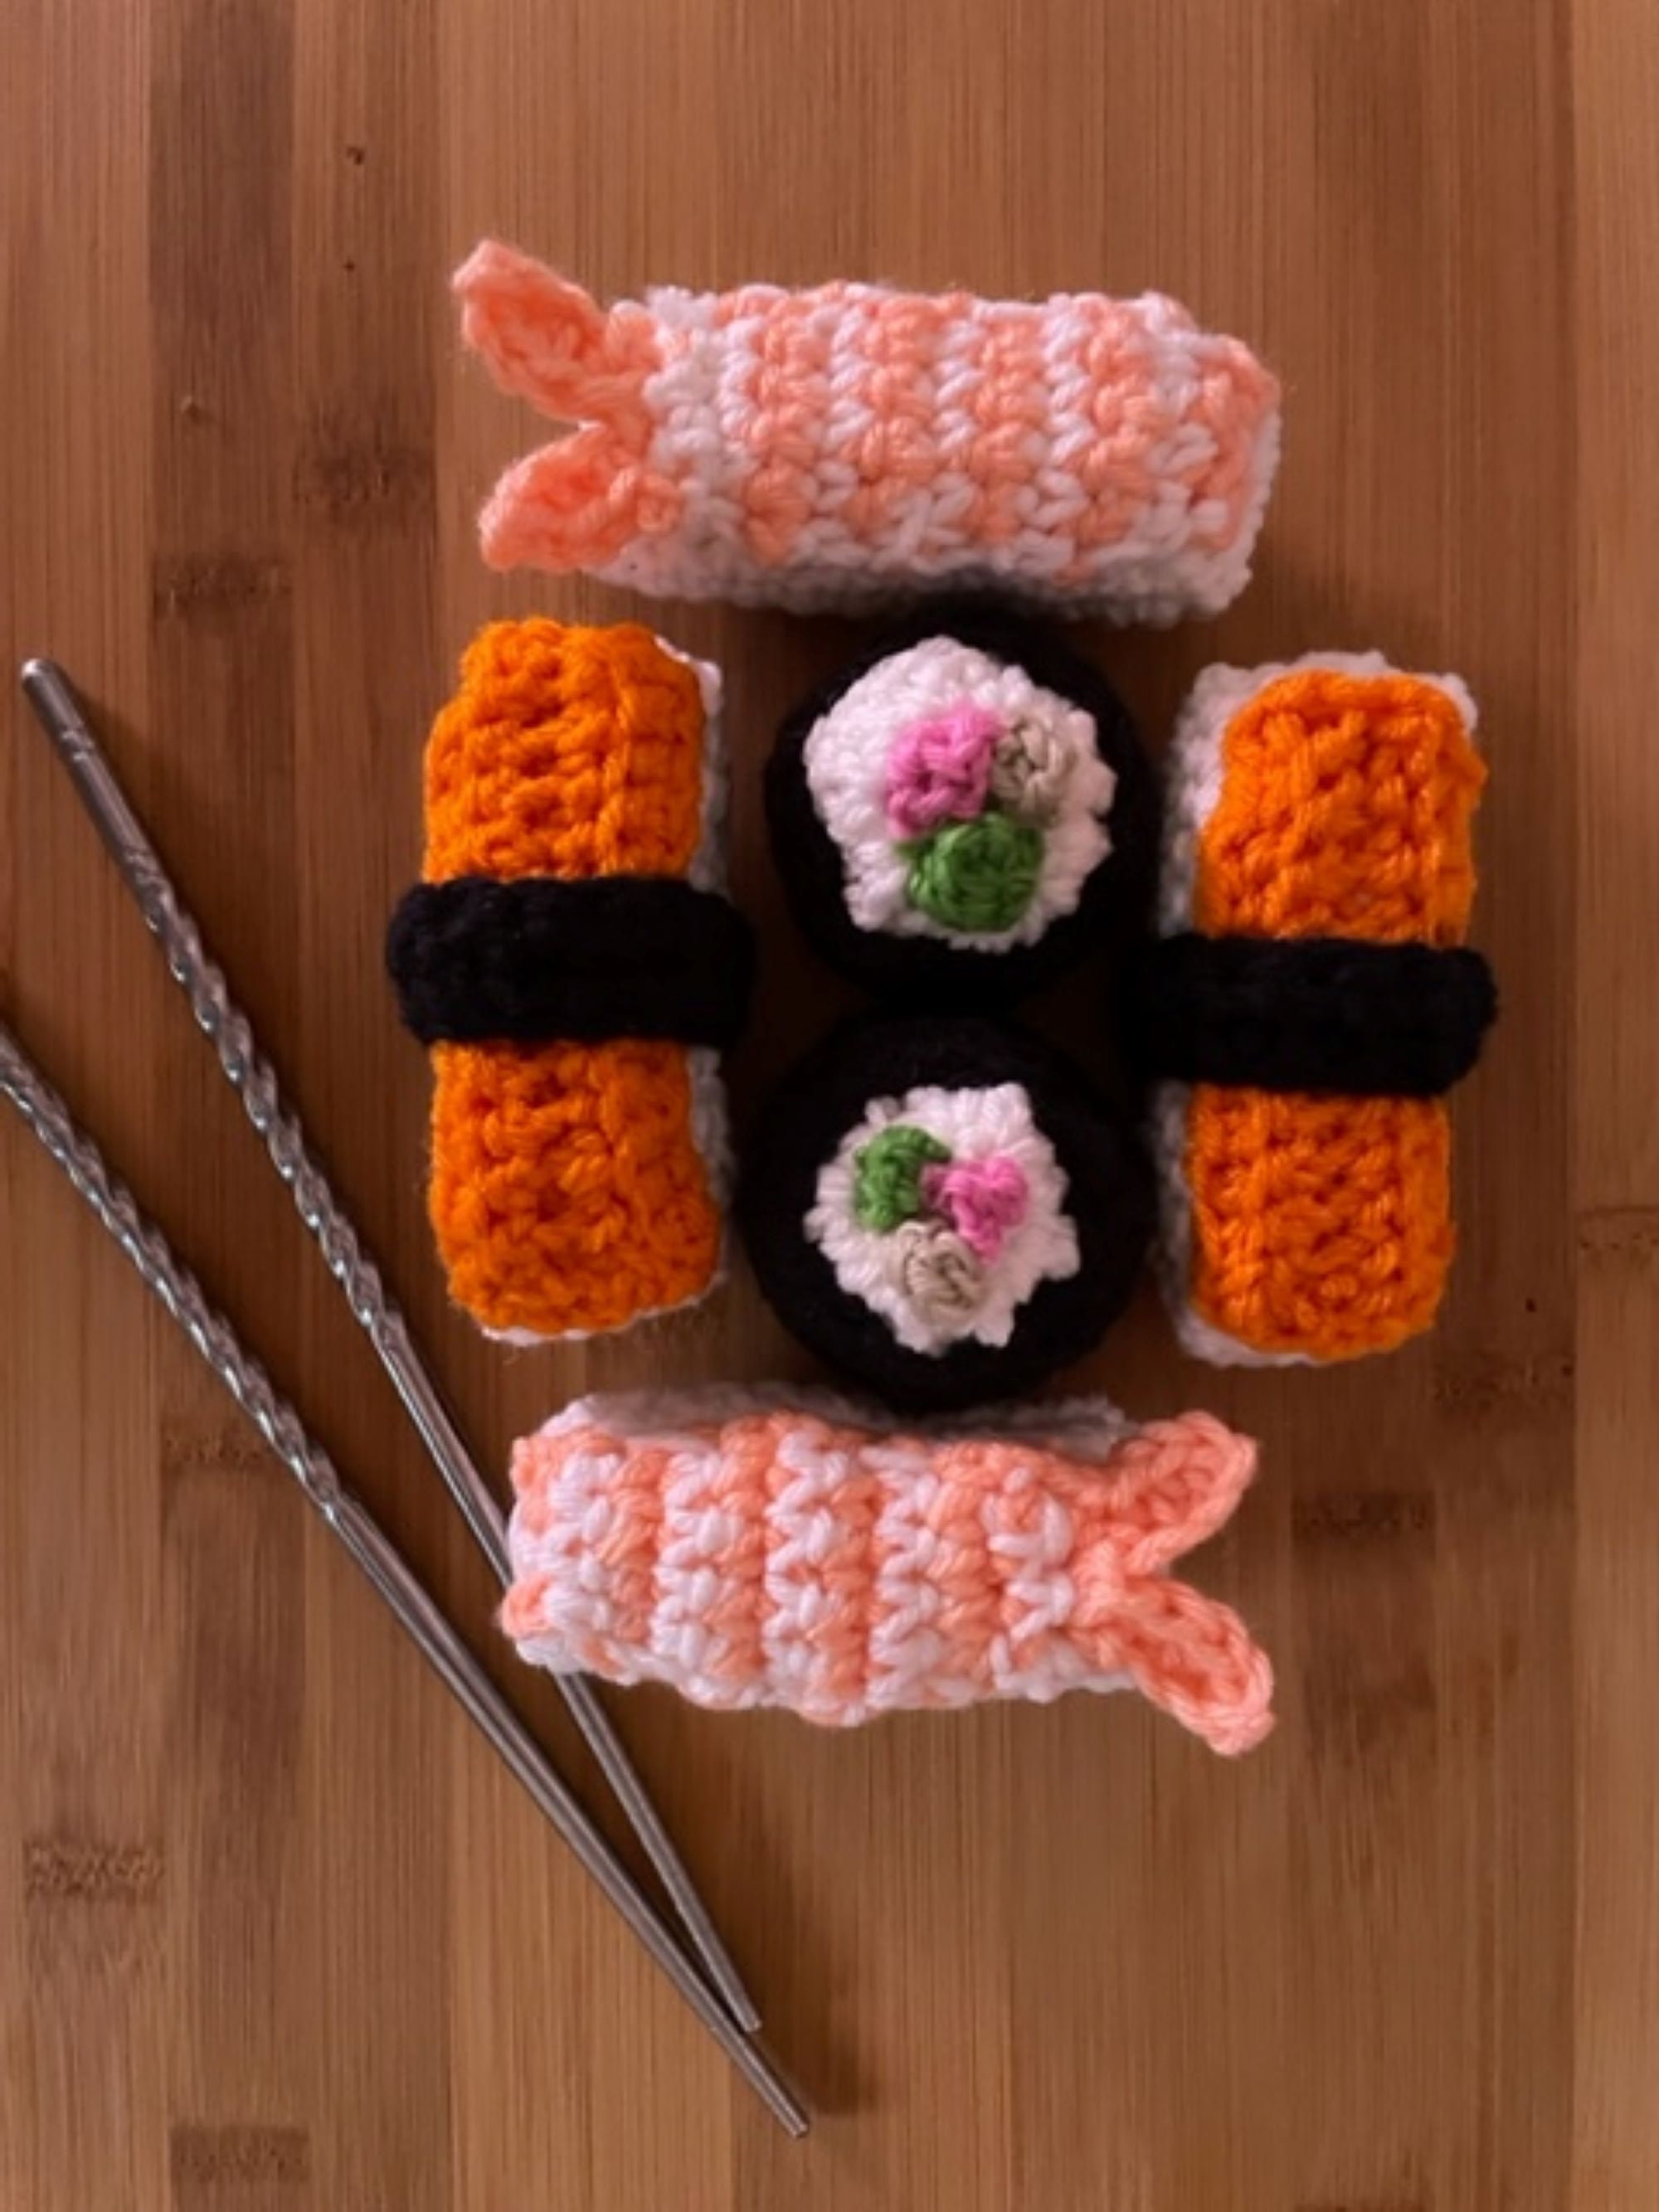 Crochet a Colorful Sushi Set For Play Or Display … Yum!